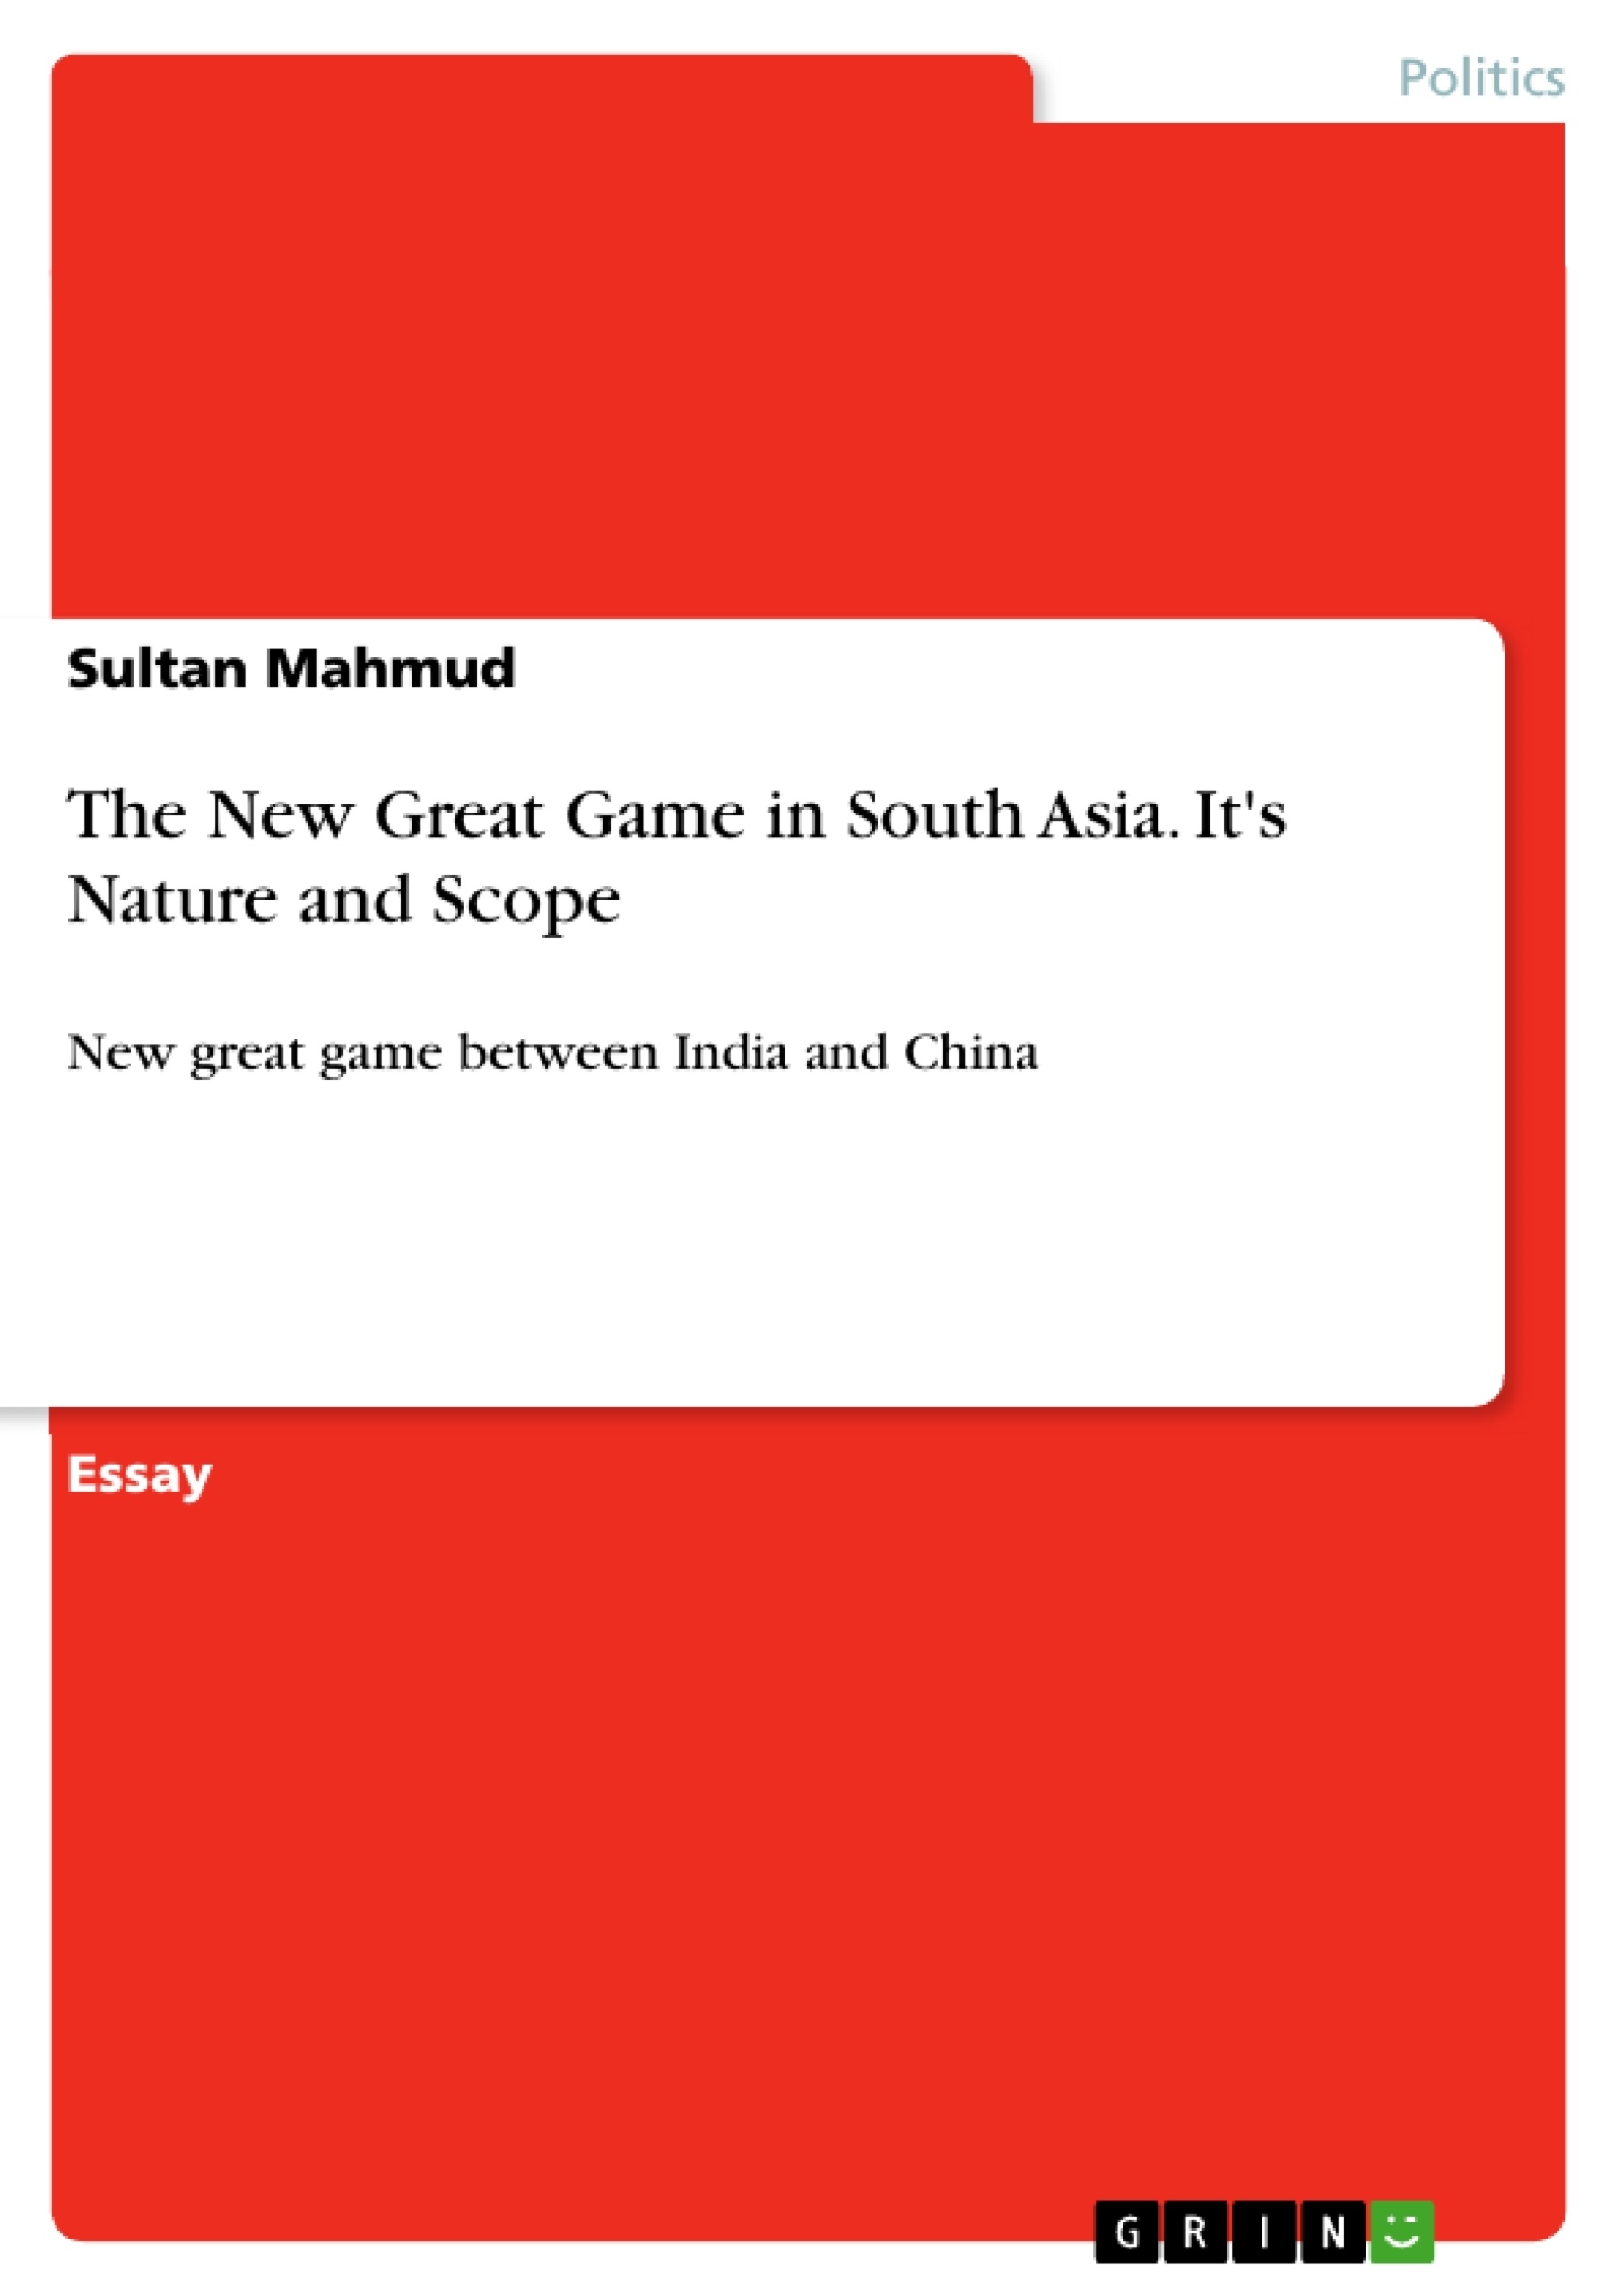 Título: The New Great Game in South Asia. It's Nature and Scope